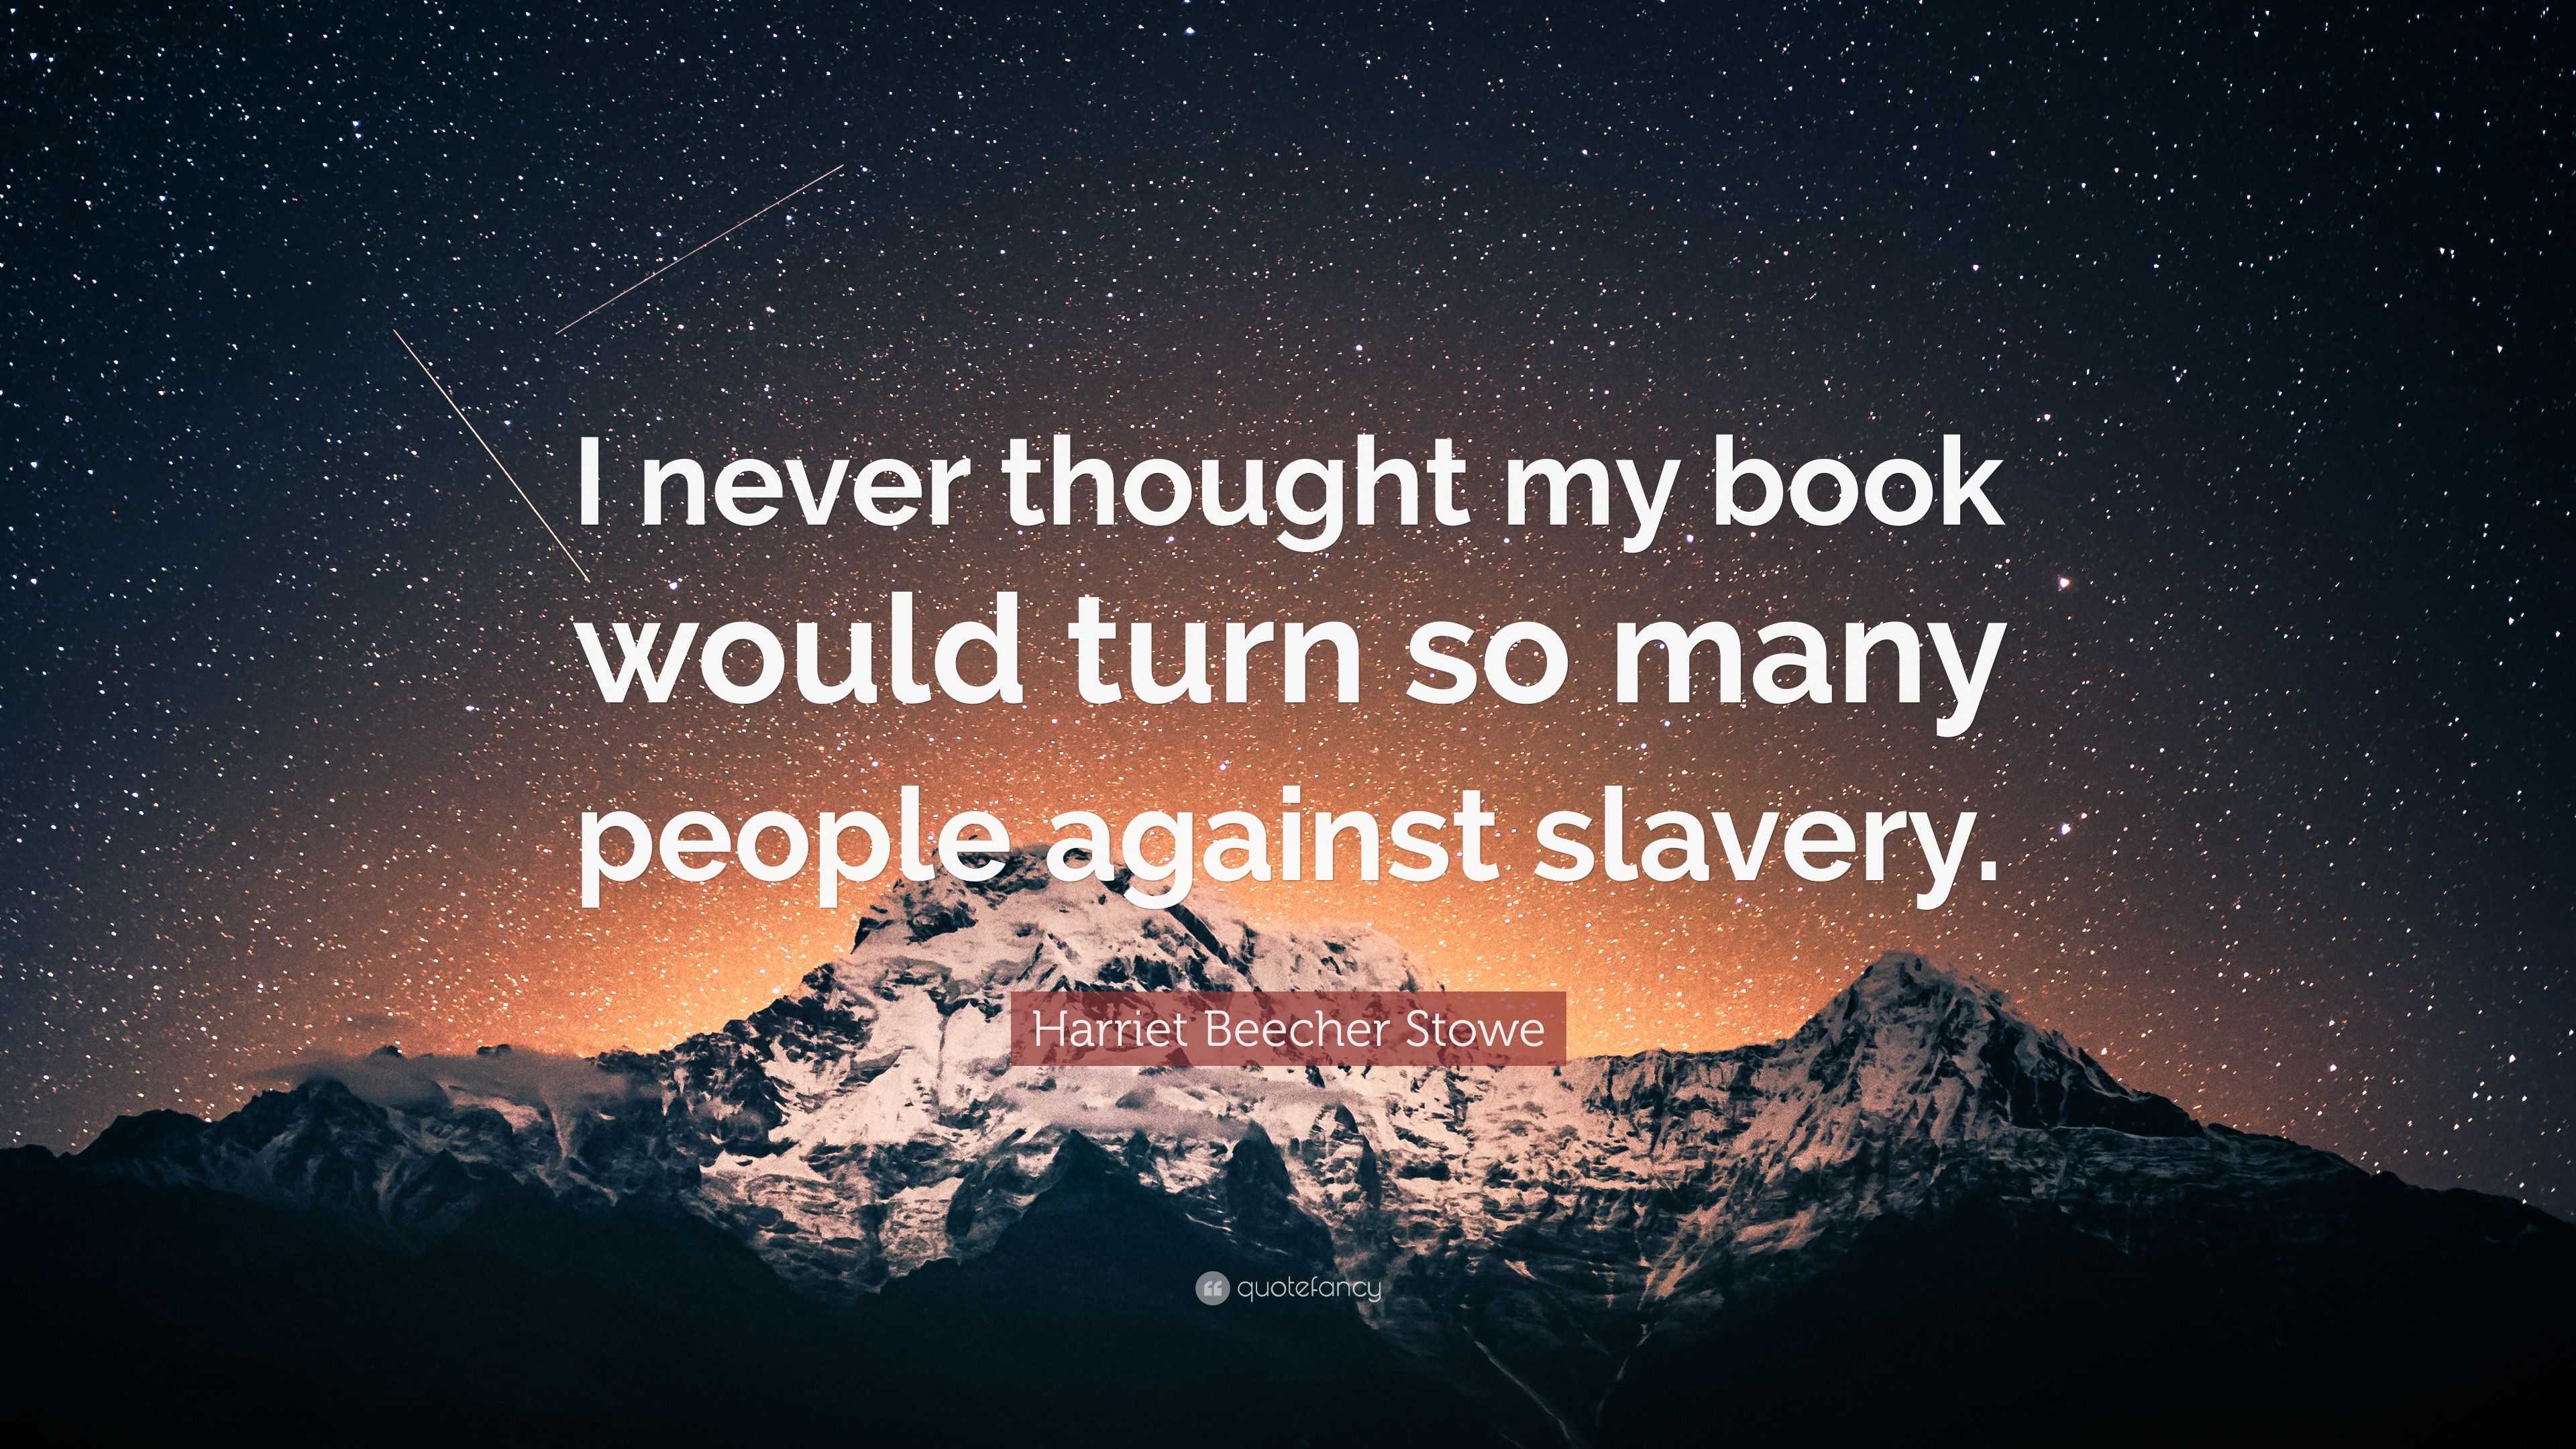 Harriet Beecher Stowe Quote: “I Never Thought My Book Would Turn So Many People Against Slavery.”